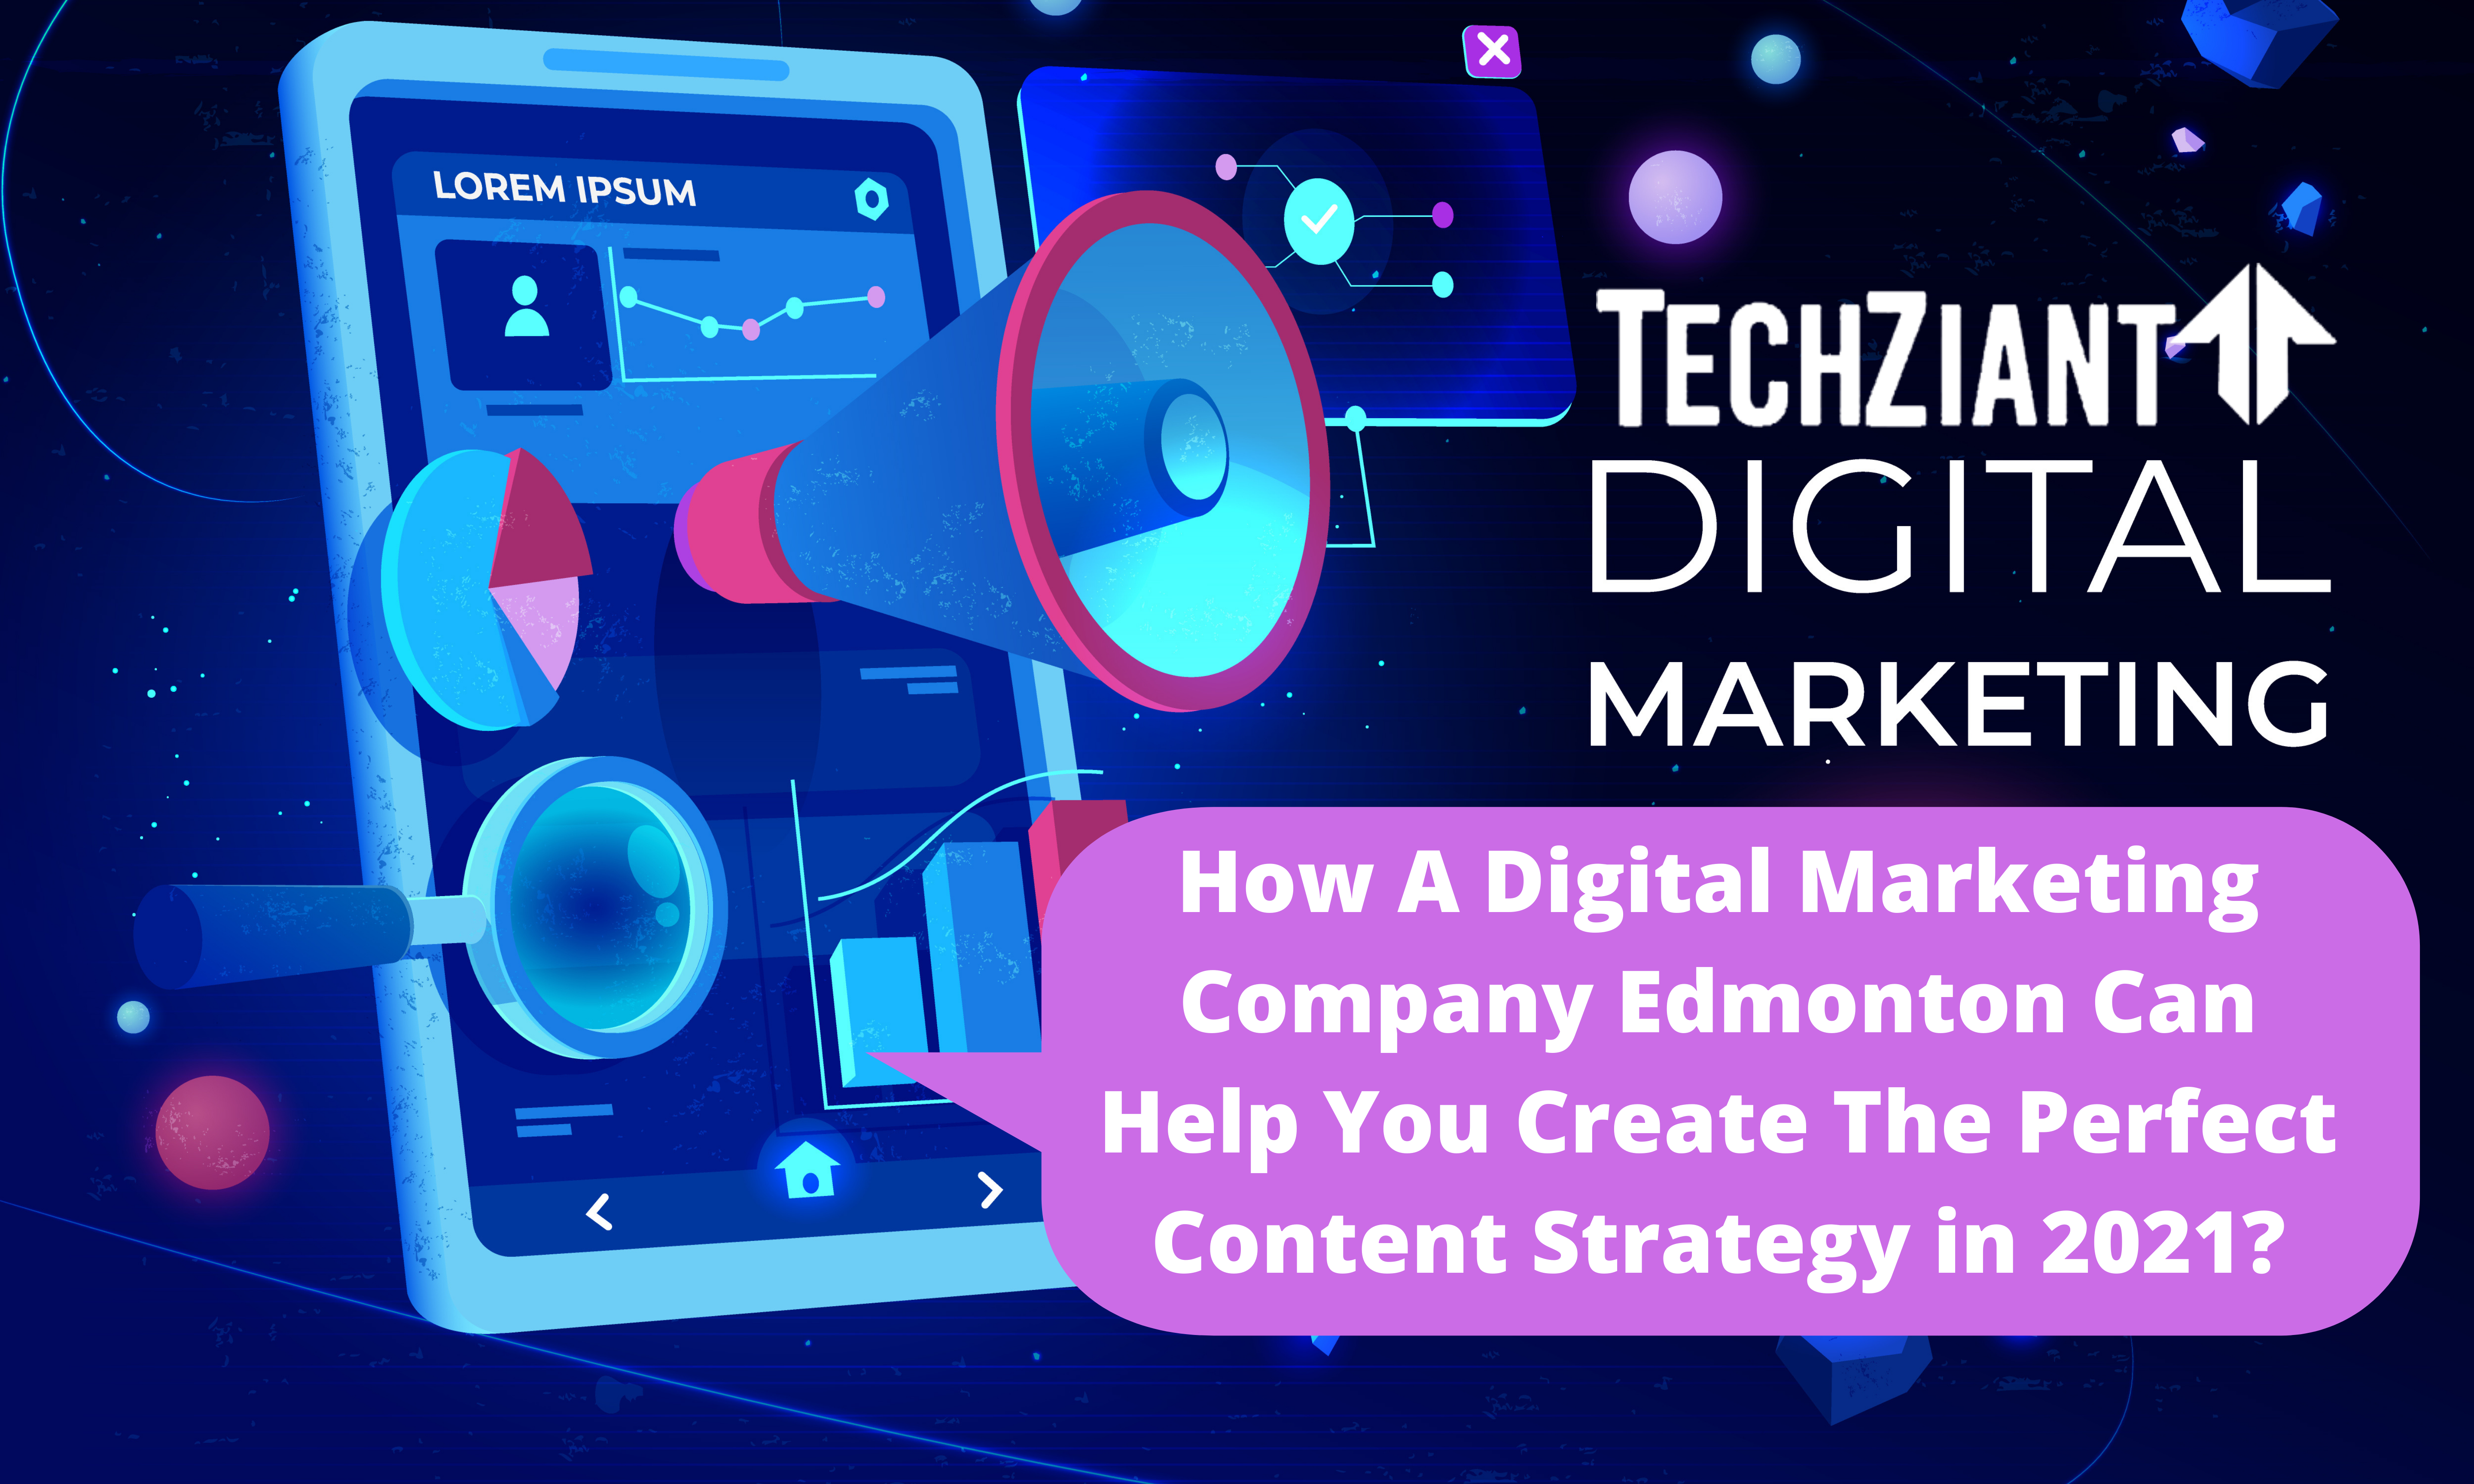 How A Digital Marketing Company Edmonton Can Help You Create The Perfect Content Strategy in 2021?